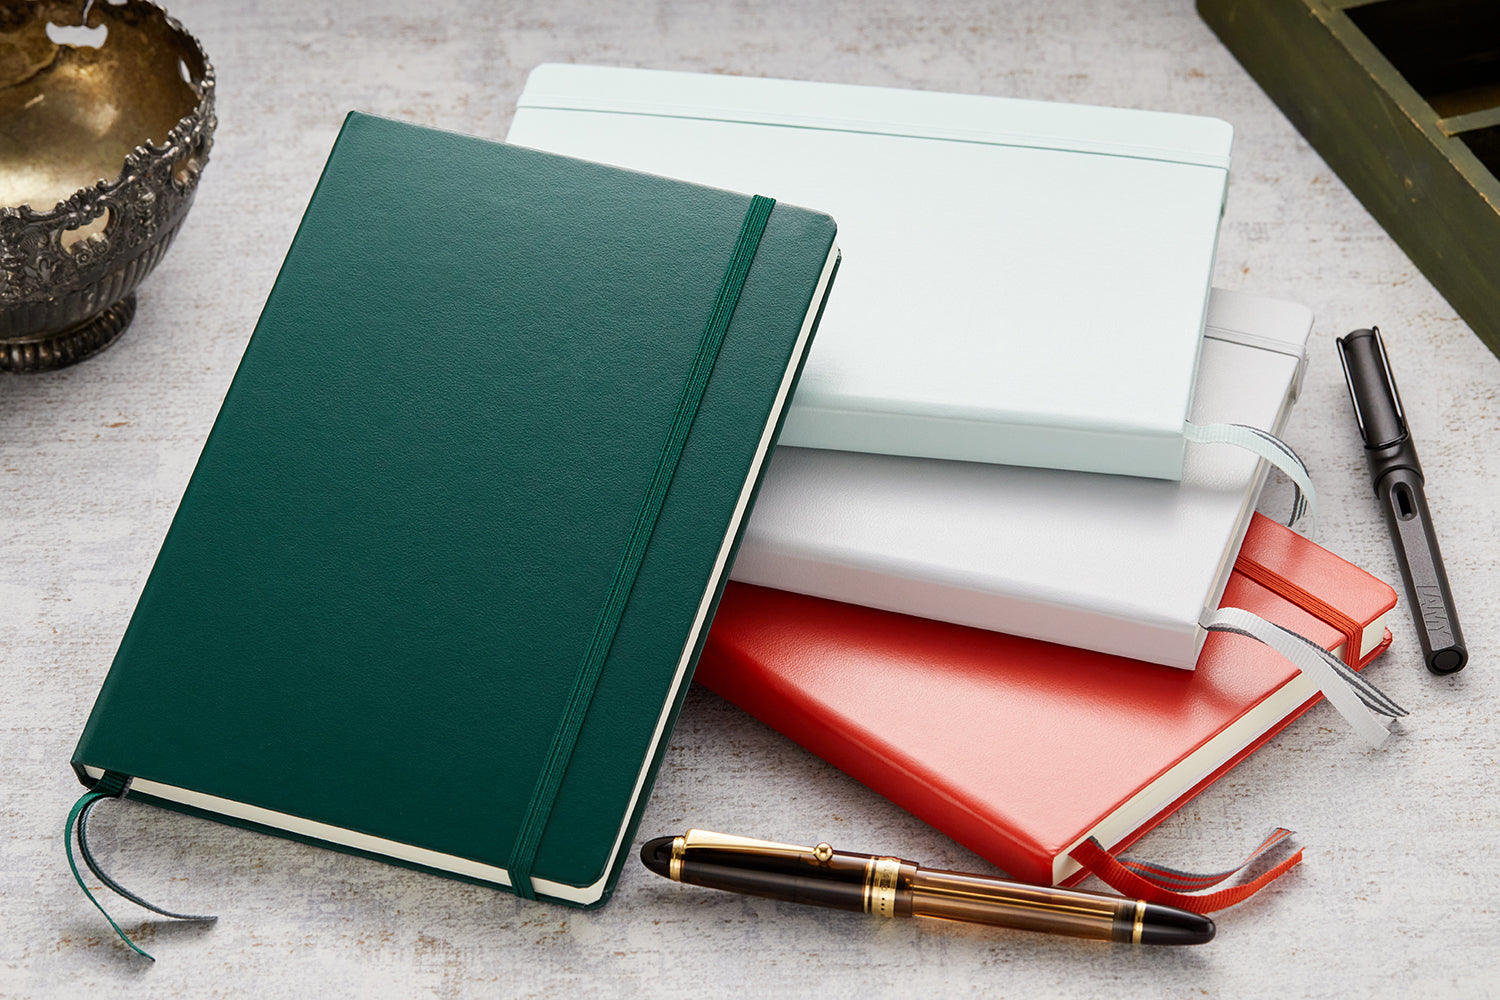 Leuchtturm1917 Classic Hardcover Notebook - All Colours, Sizes & Paper Types